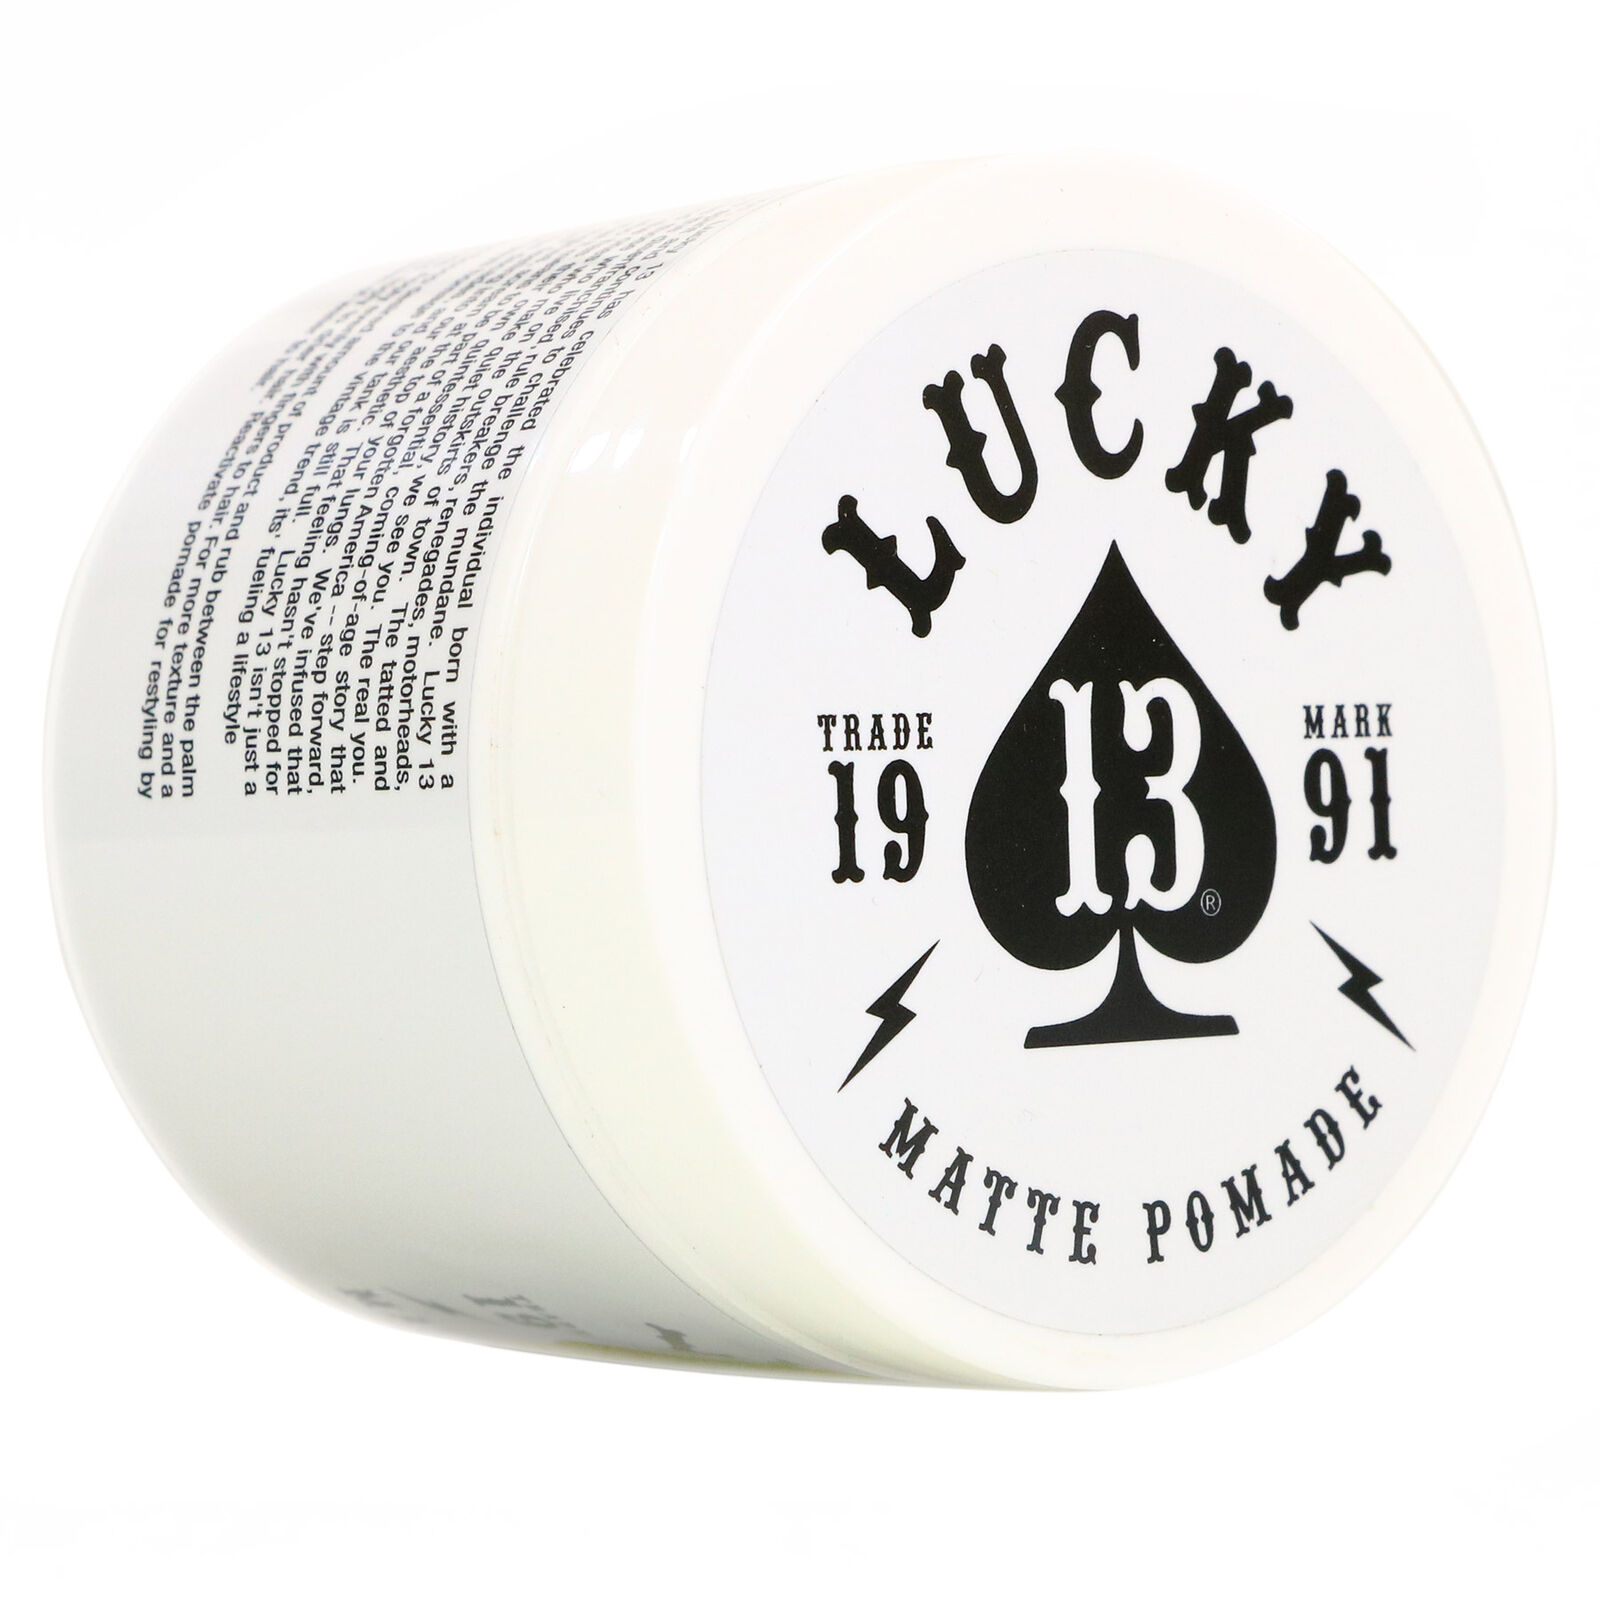 Authentic LUCKY 13 Matte Pomade 4oz High Hold Matte Finish NEW